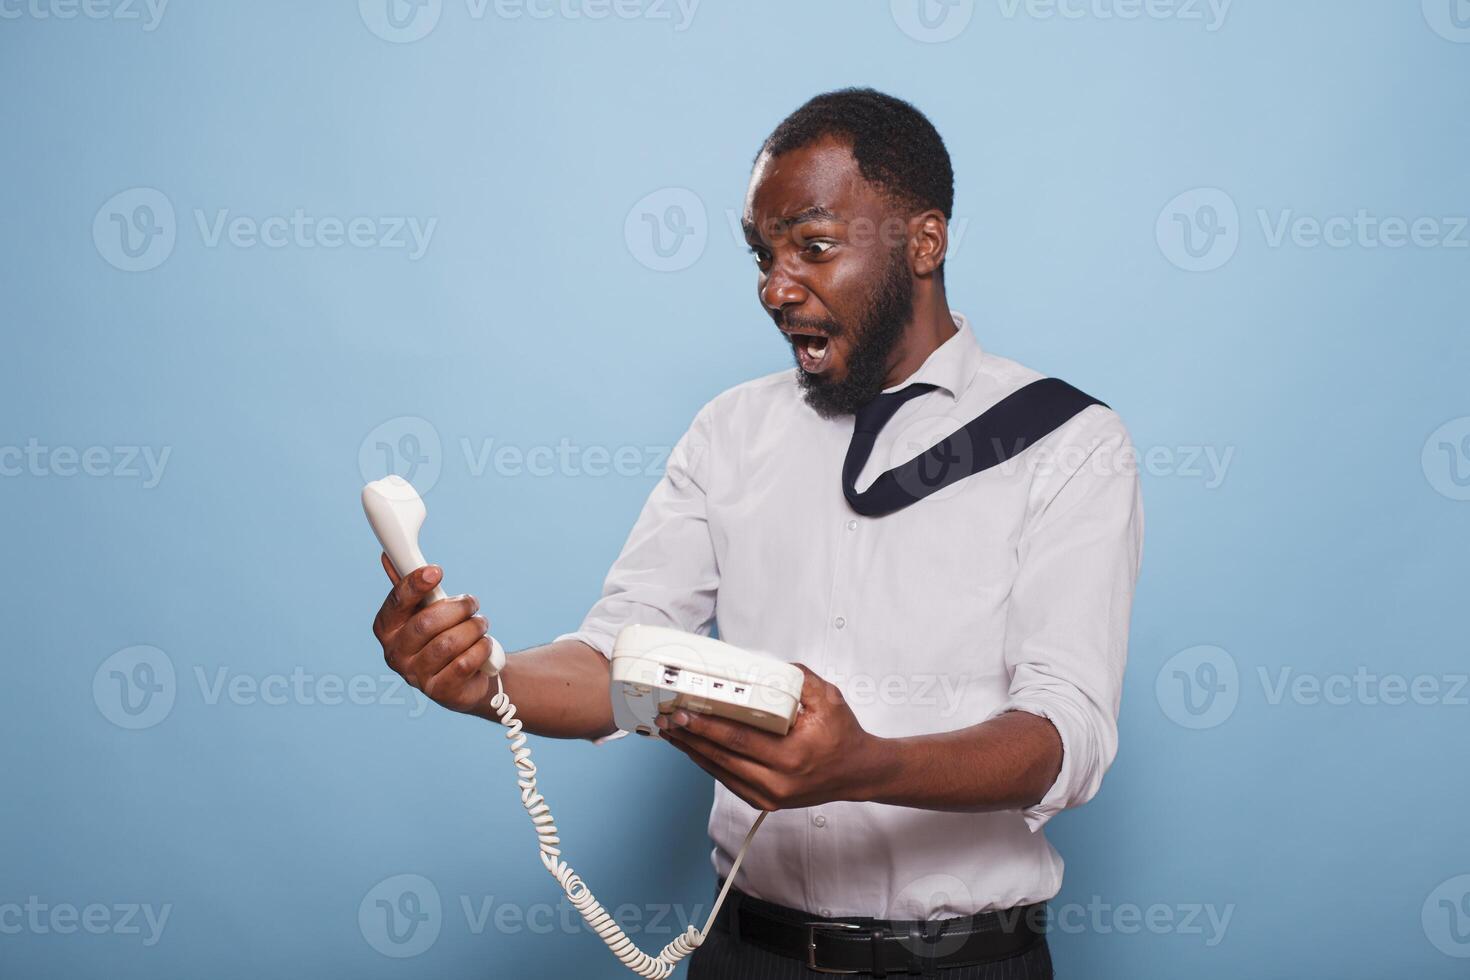 After losing an argument with person on other end of line, stunned businessman stares in awe at receiver of a cord phone. Office worker holding landline phone, cannot believe what he is hearing. photo